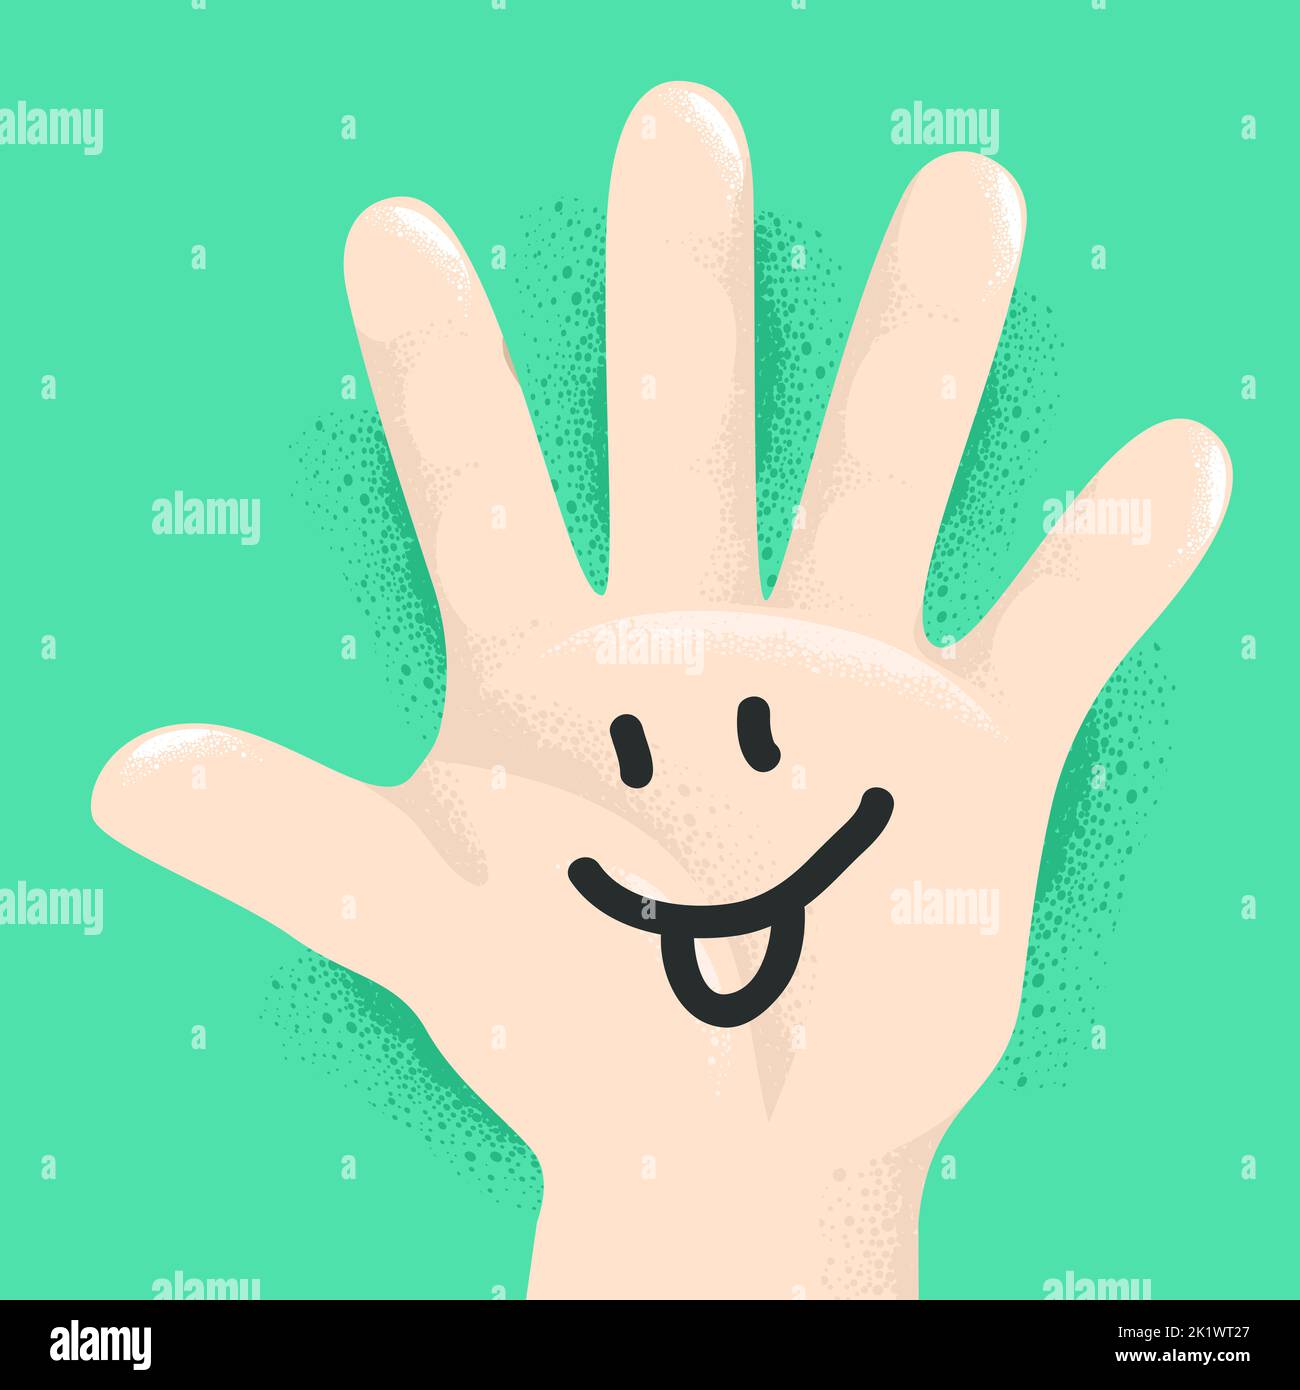 Illustration of a Hand of a Kid with Smile Doodle on Its Palm Stock Photo